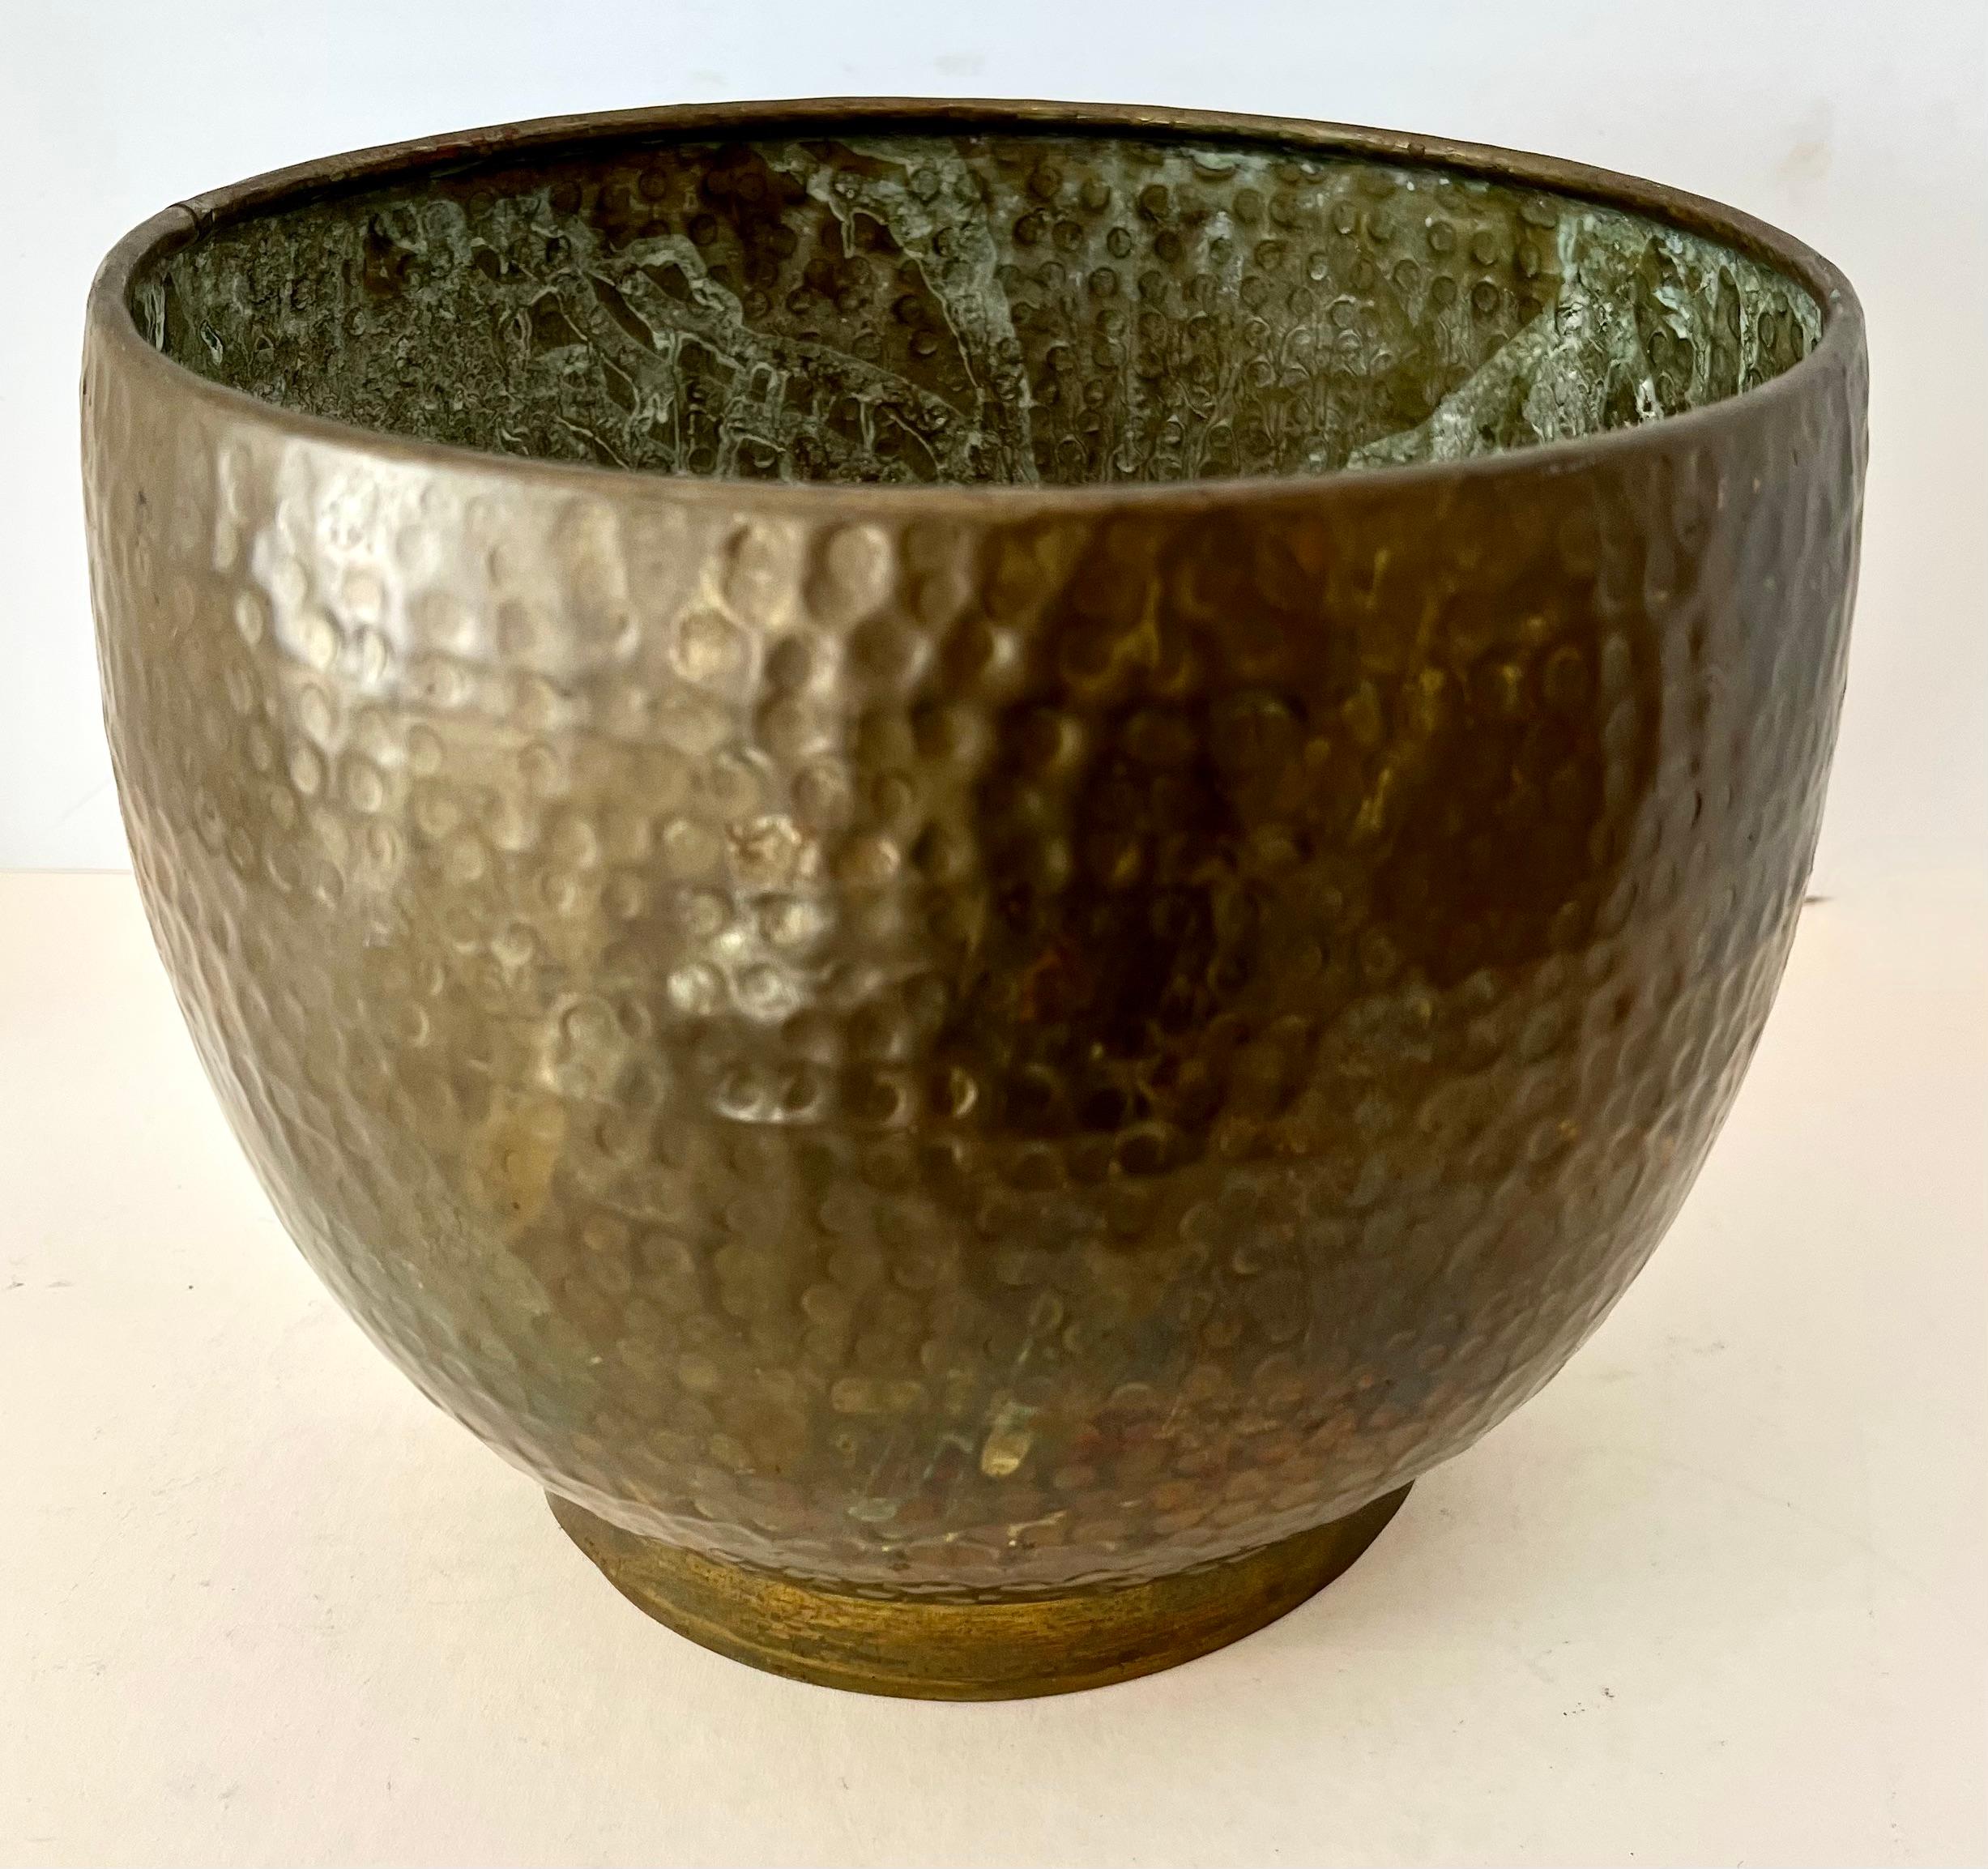 Hammered Cachepot, jardiniere or planter. A lovely patinated brass piece, perfect for your plant or floral arrangement. The piece could also hold other things, like mail or kindling? 

A compliment to many spaces indoor or outdoors. A nice size